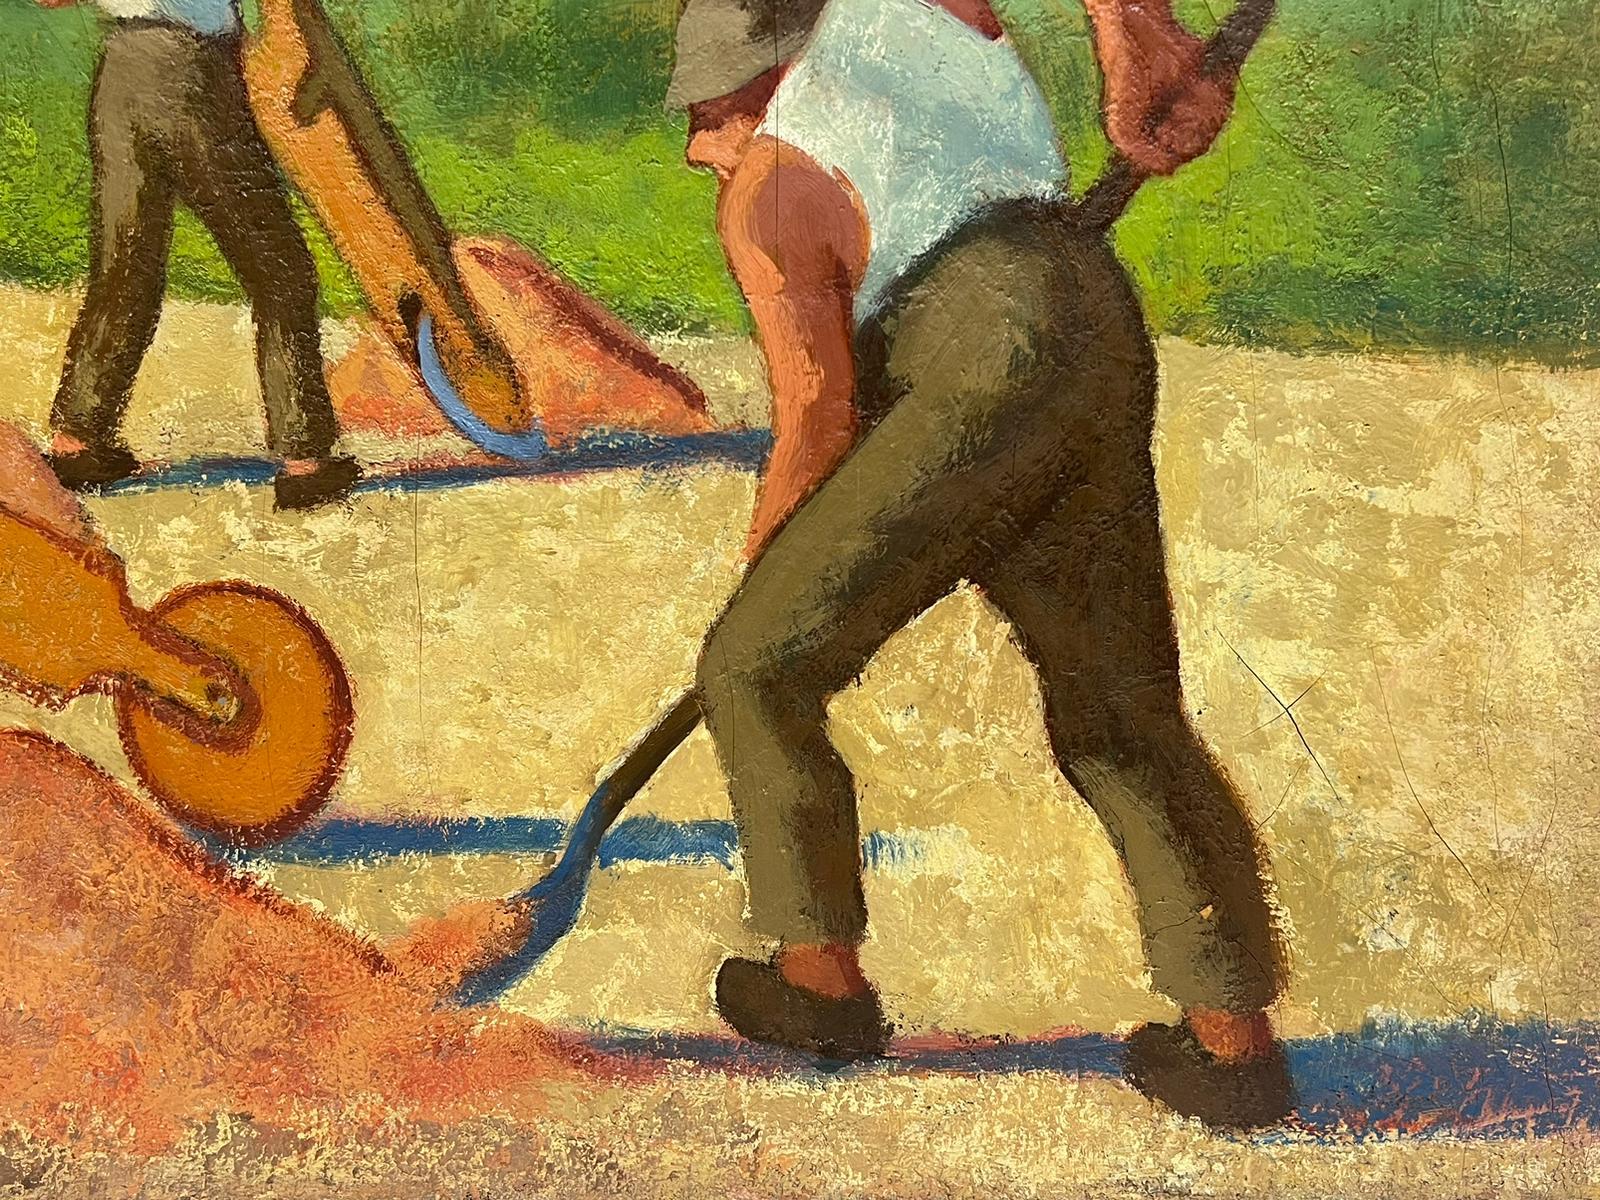 The Labourers
French School, mid 20th century
oil on canvas, unframed
canvas: 24 x 29 inches
provenance: private collection, Marseille
condition: very good and sound condition